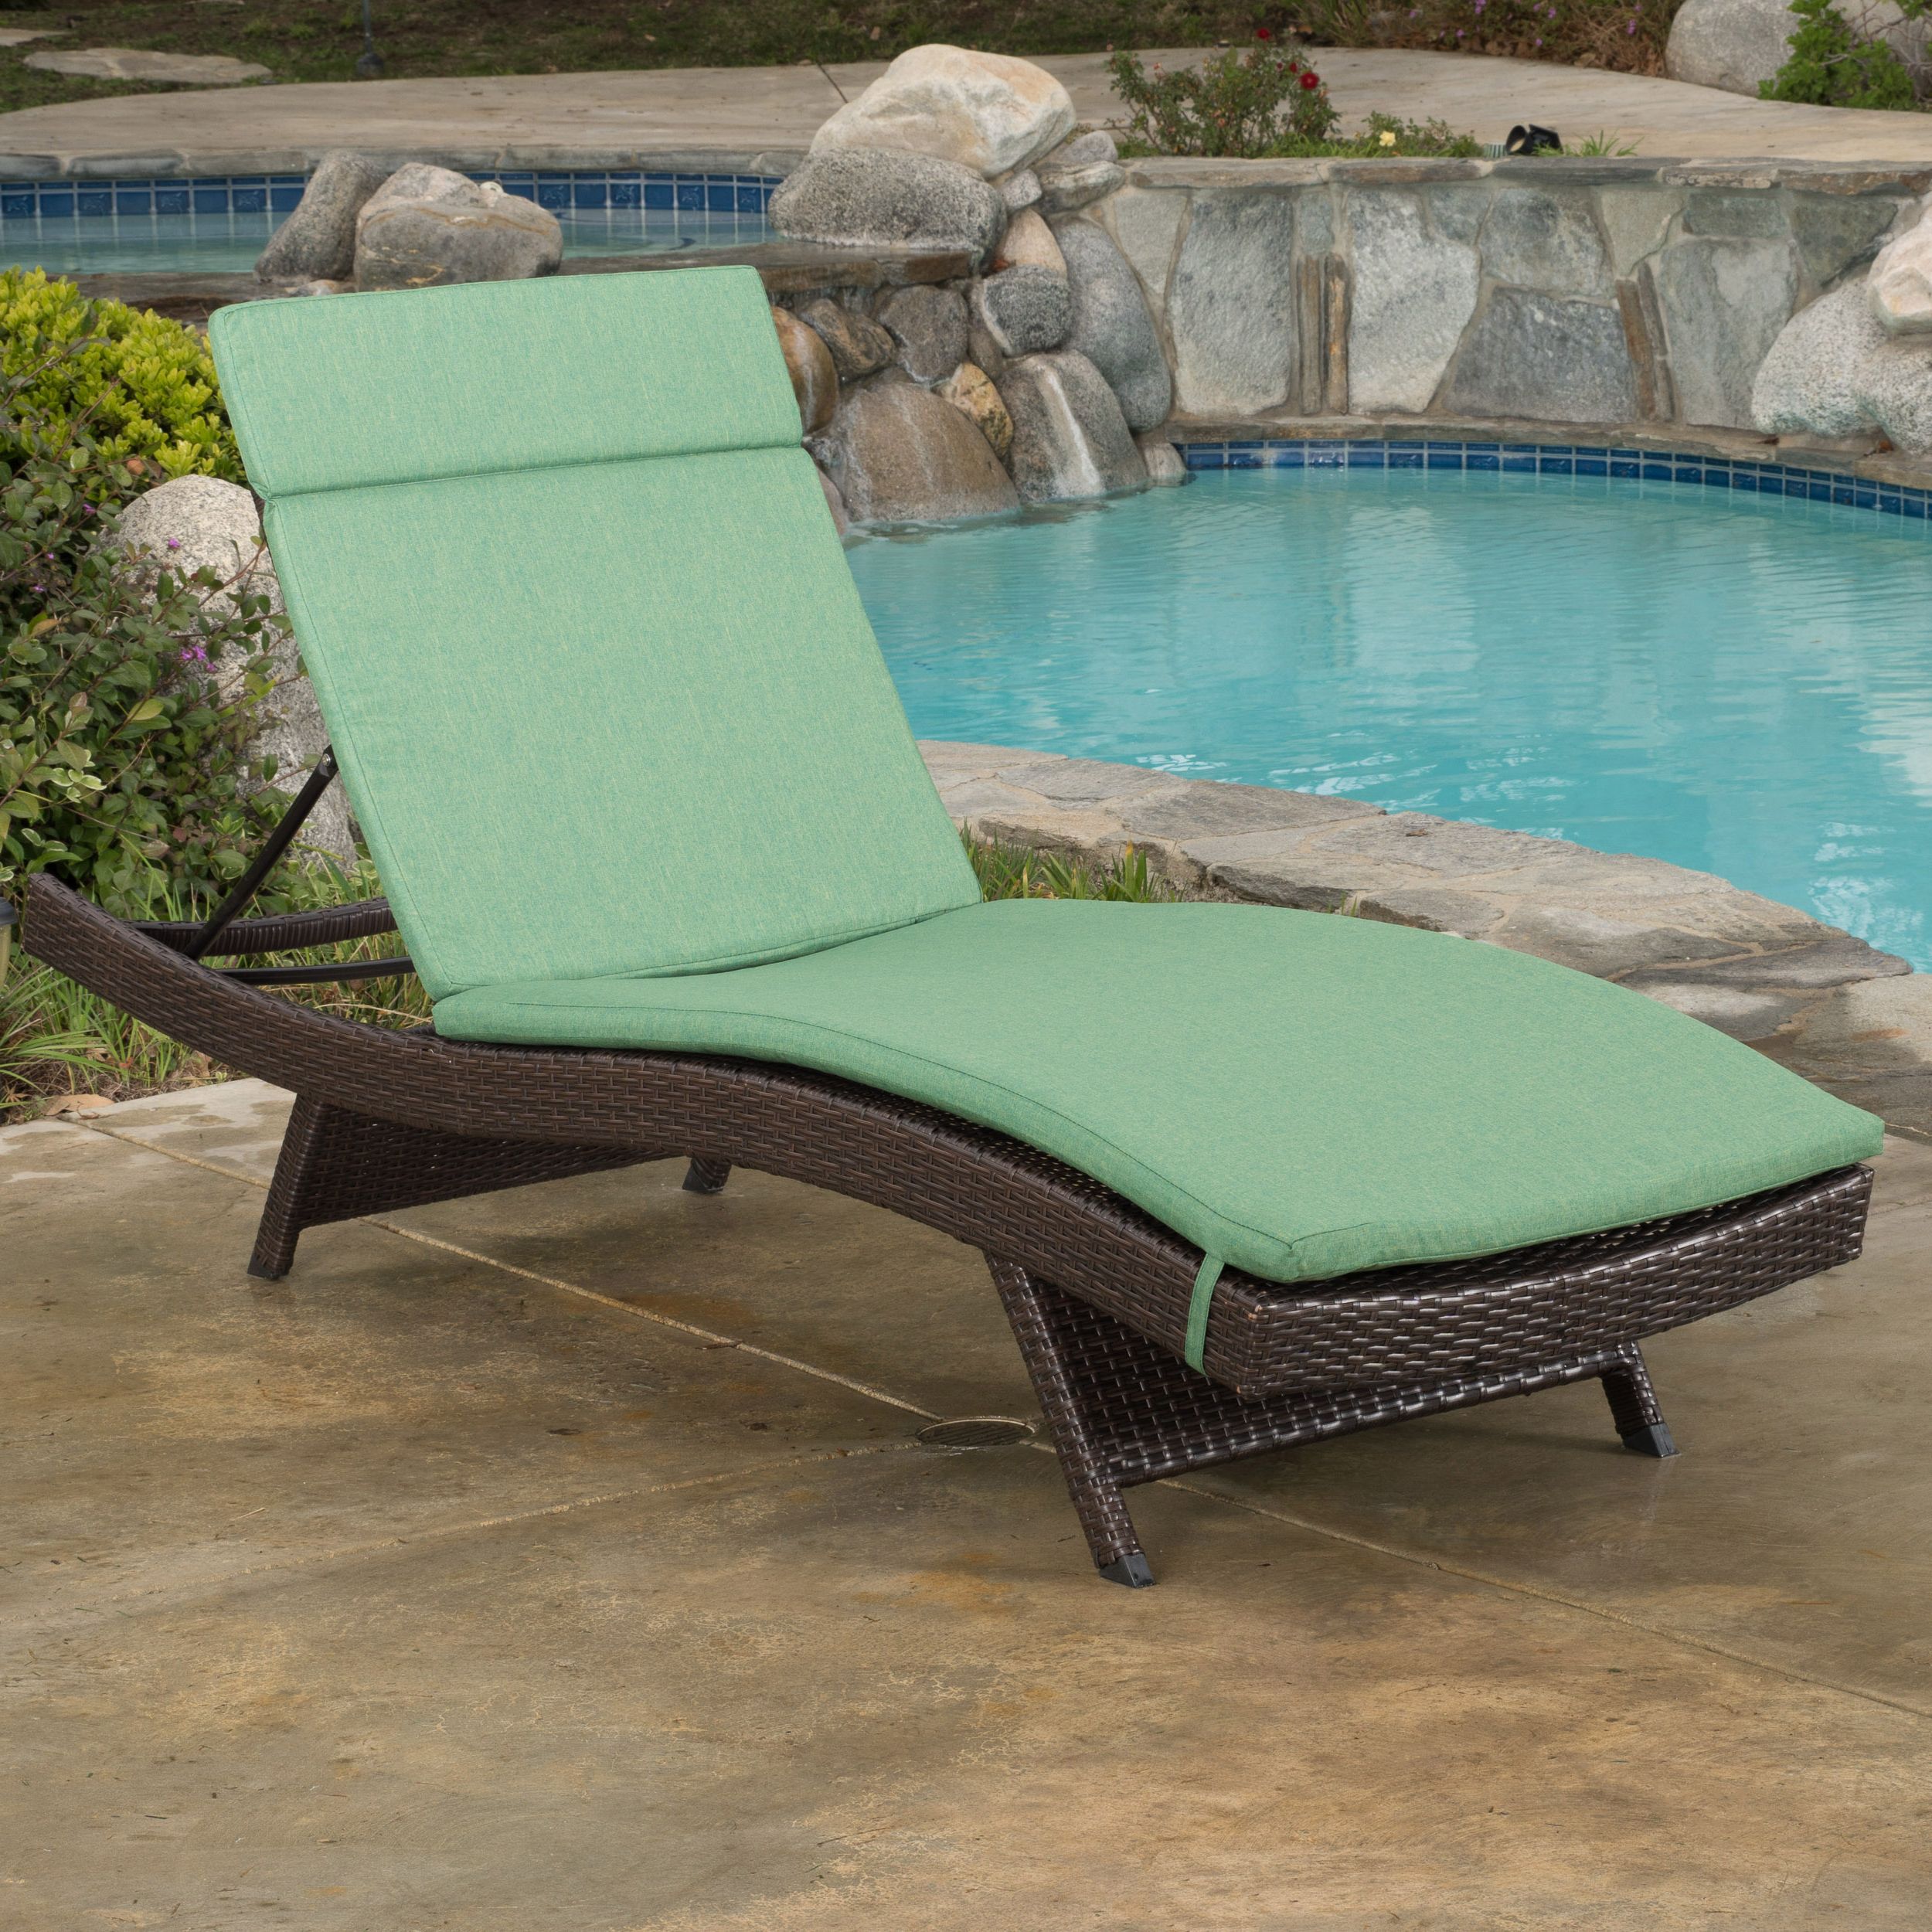 Popular Wicker Adjustable Chaise Loungers With Cushion With Anthony Outdoor Wicker Adjustable Chaise Lounge With (View 24 of 25)